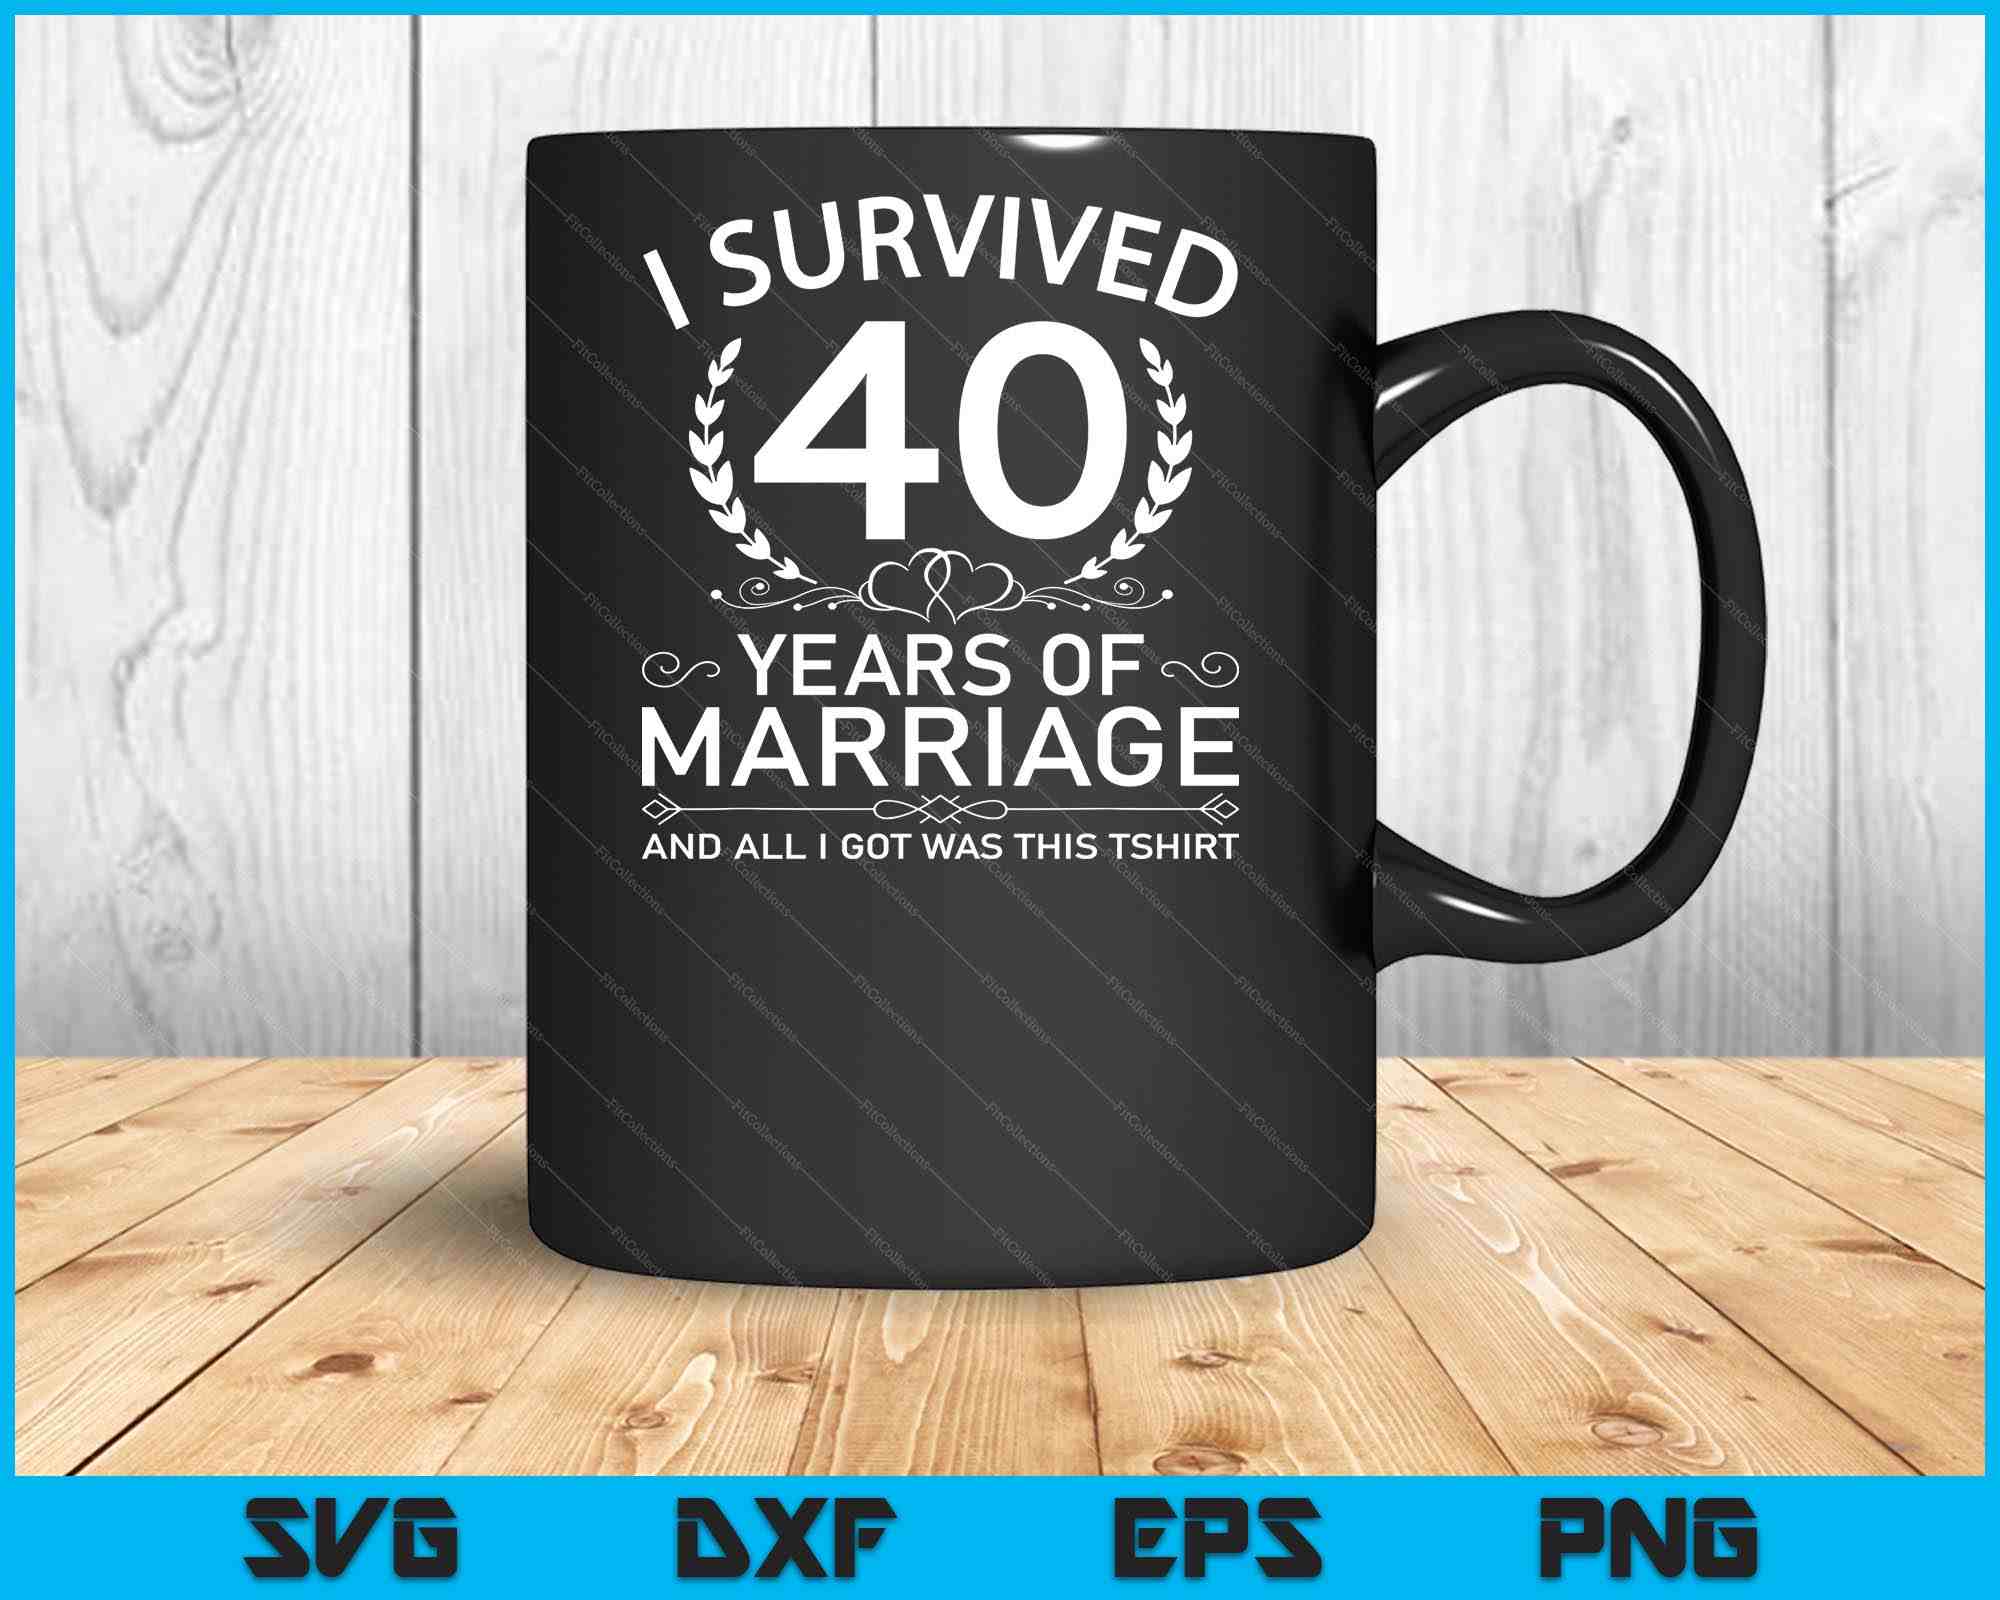 40th Wedding Anniversary Gifts For Couple To Mark Special Day | by GiftOMG  | Medium